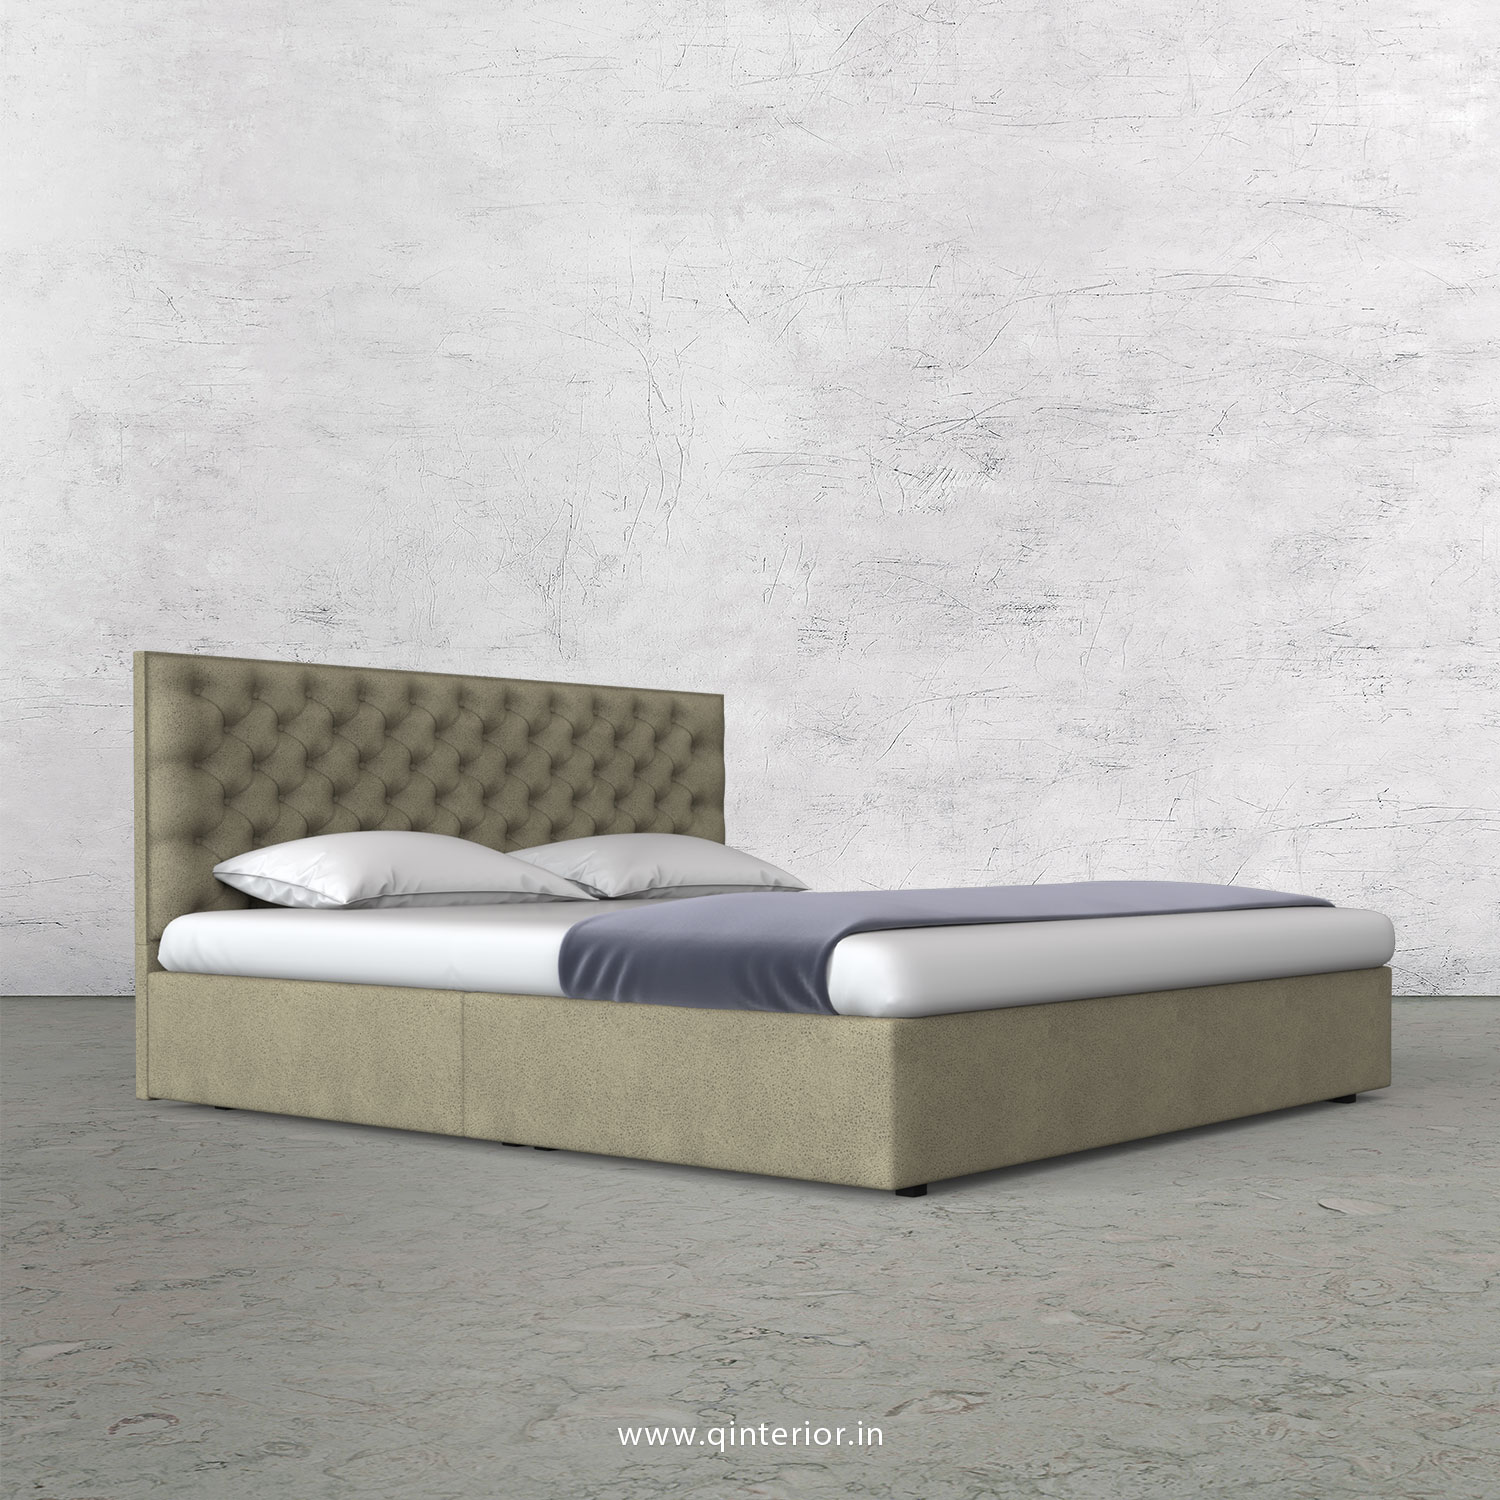 Orion King Size Bed in Fab Leather Fabric - KBD009 FL10